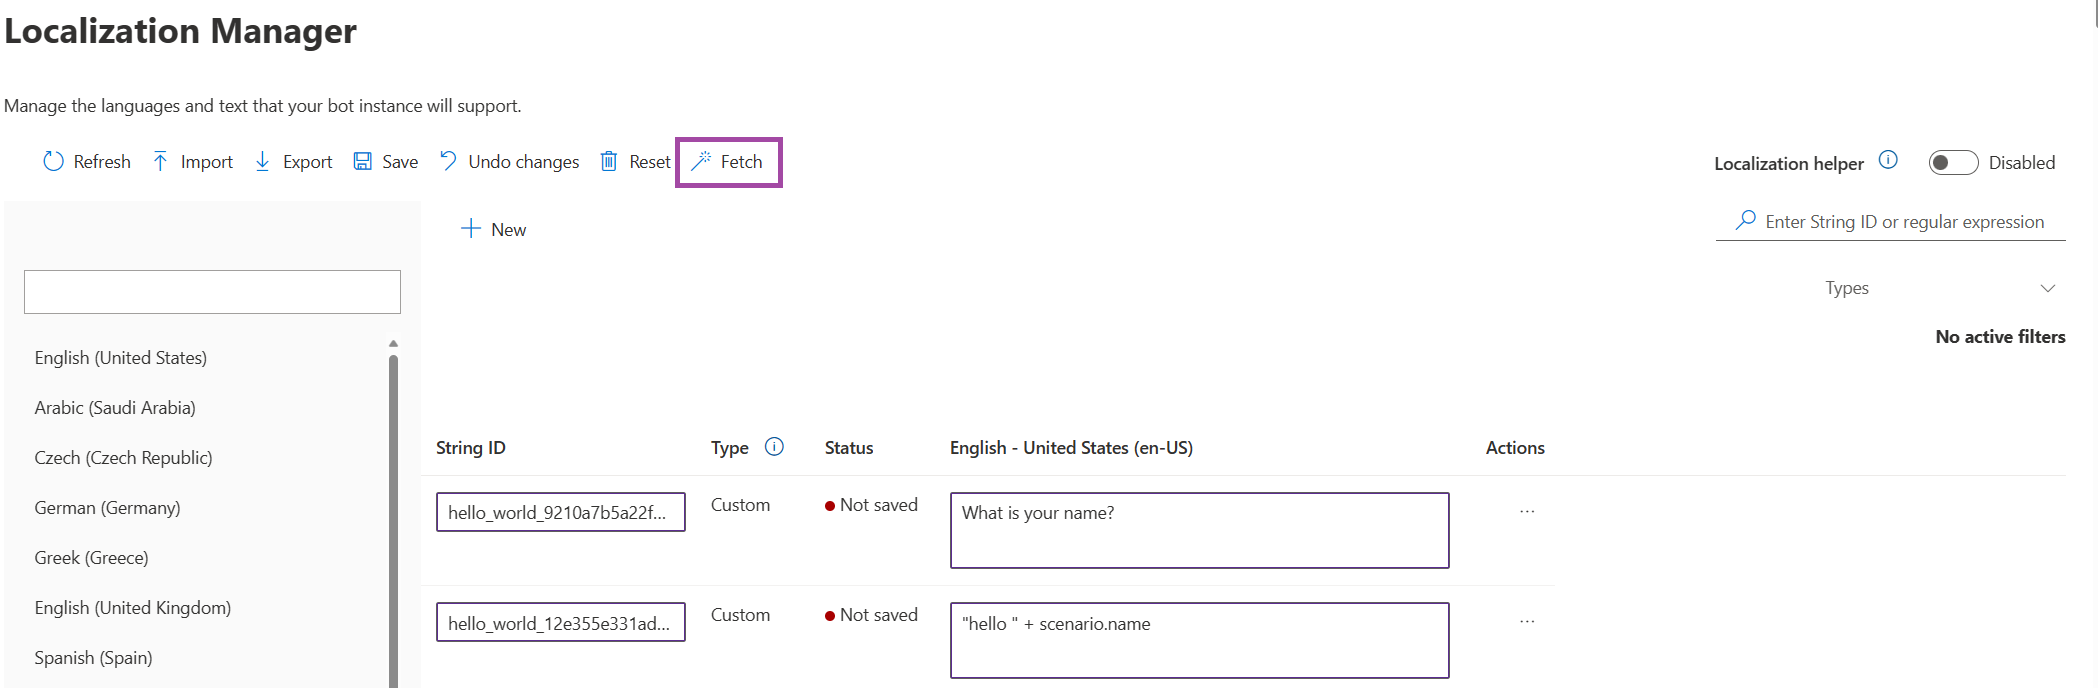 A screenshot of the Localization Manager fetching the strings